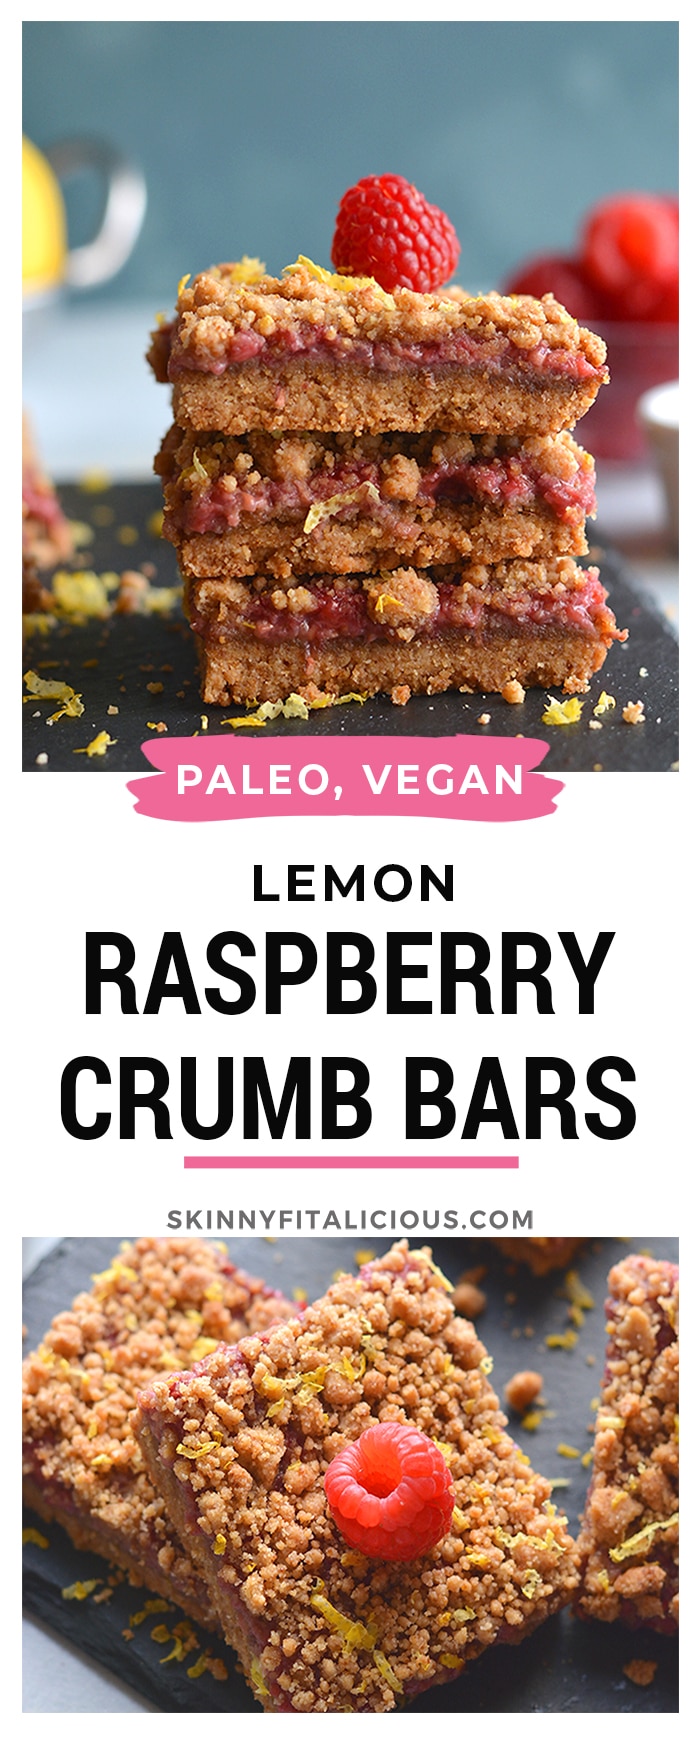 Paleo Vegan Raspberry Crumb Bars! Dairy-free, made with almond flour and wholesome ingredients! A truly addicting grain-free dessert that's good for you. Gluten Free + Low Calorie + Vegan + Paleo